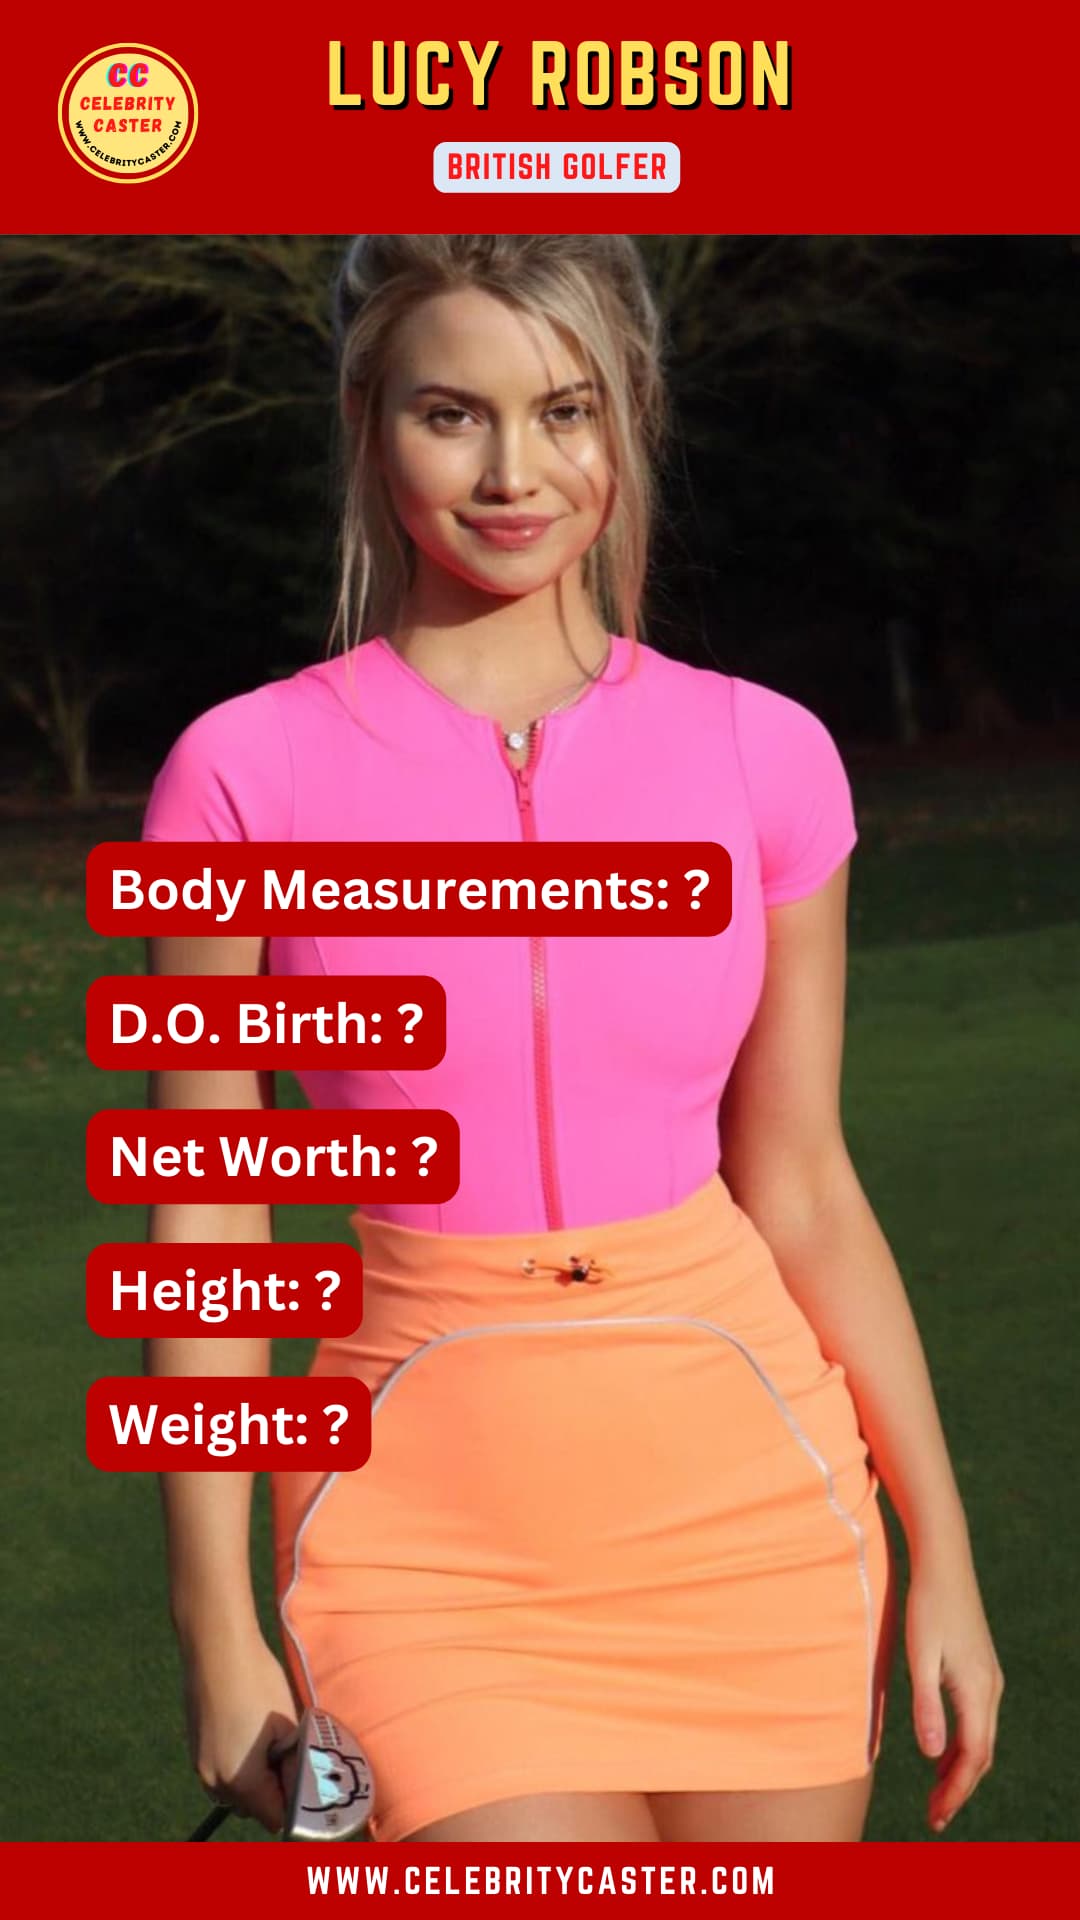 Here I am going to reveal a female golfer Lucy Robson height and other body measurements like Lucy Robson weight, Lucy Robson age and Lucy Robson Net Worth!